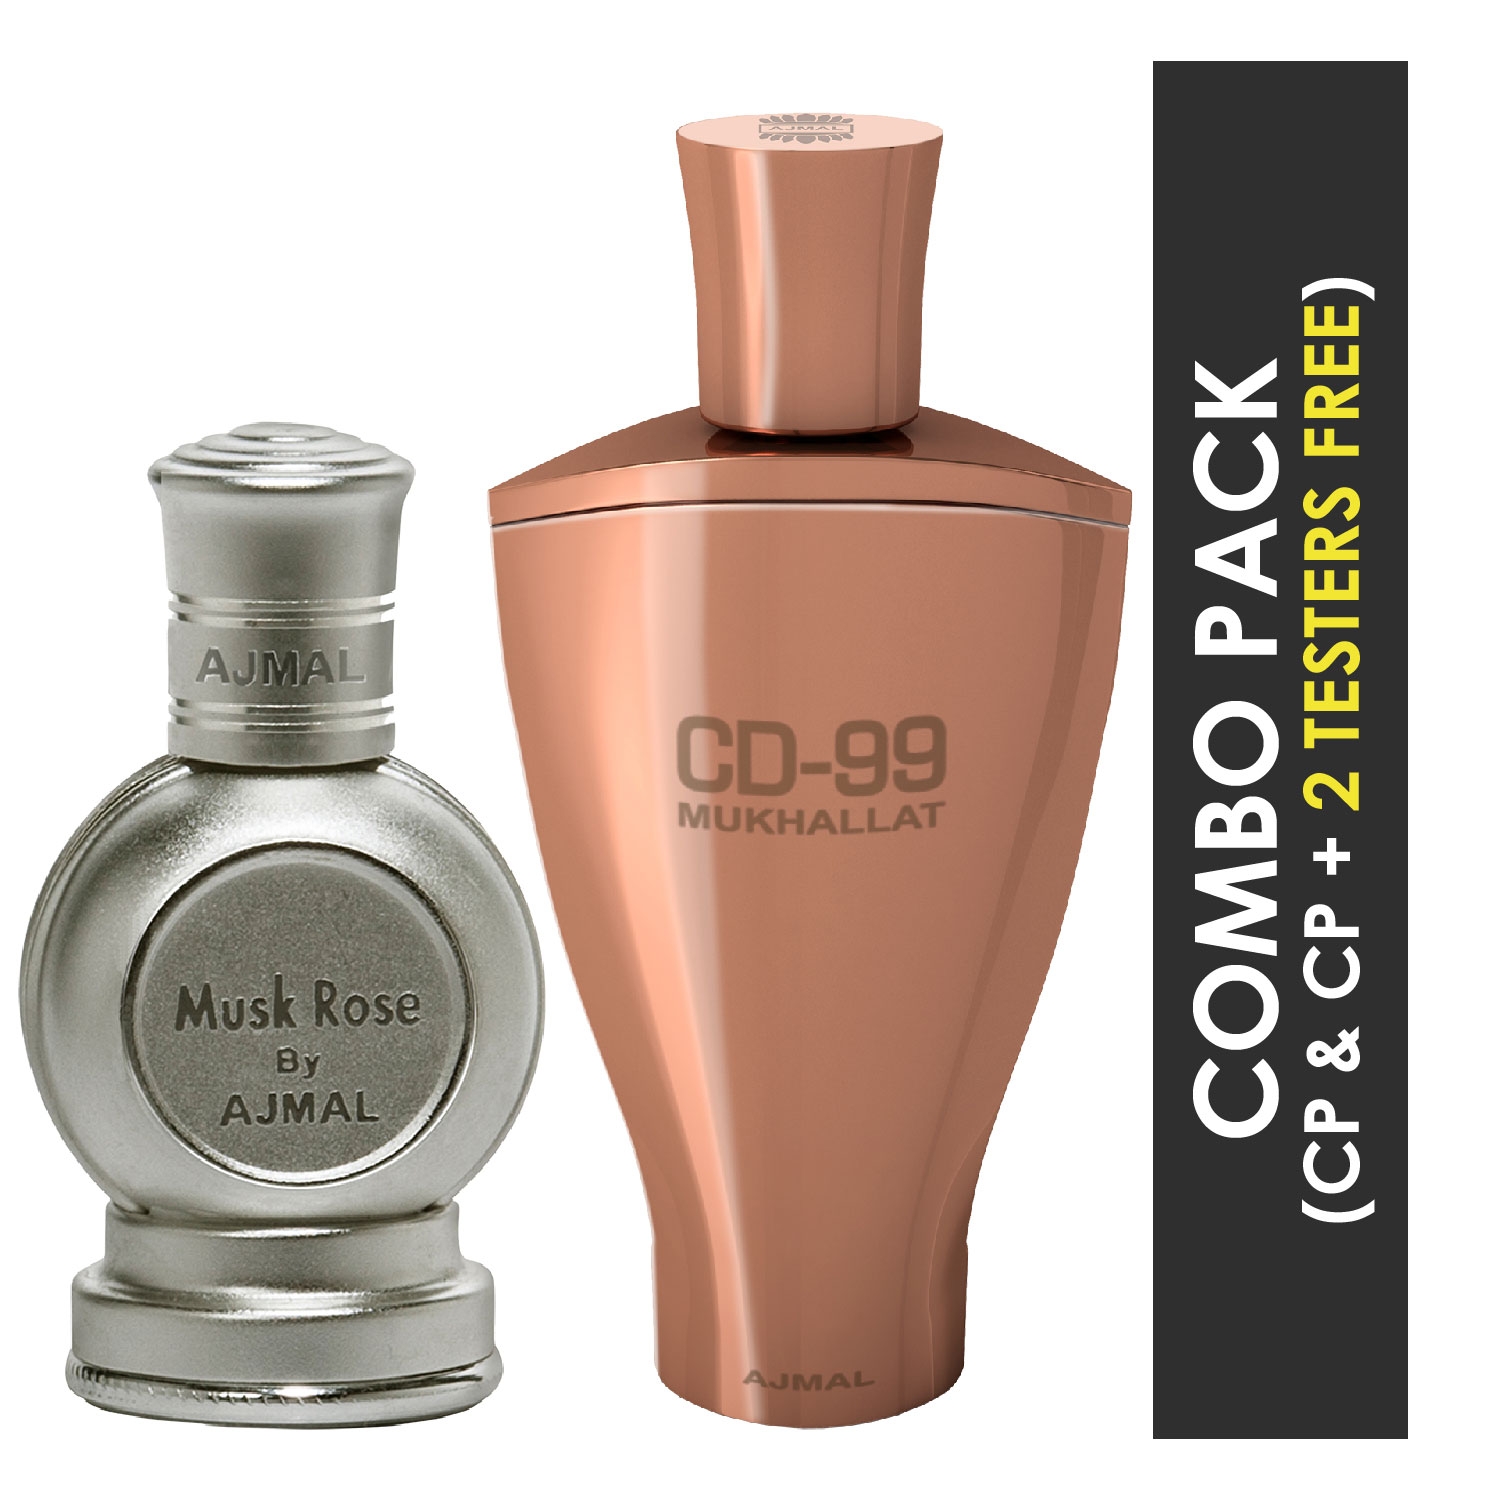 Ajmal | Ajmal Musk Rose Concentrated Perfume Attar 12ml for Unisex and CD 99 Mukhallat Concentrated Perfume Attar 14ml for Unisex + 2 Parfum Testers FREE